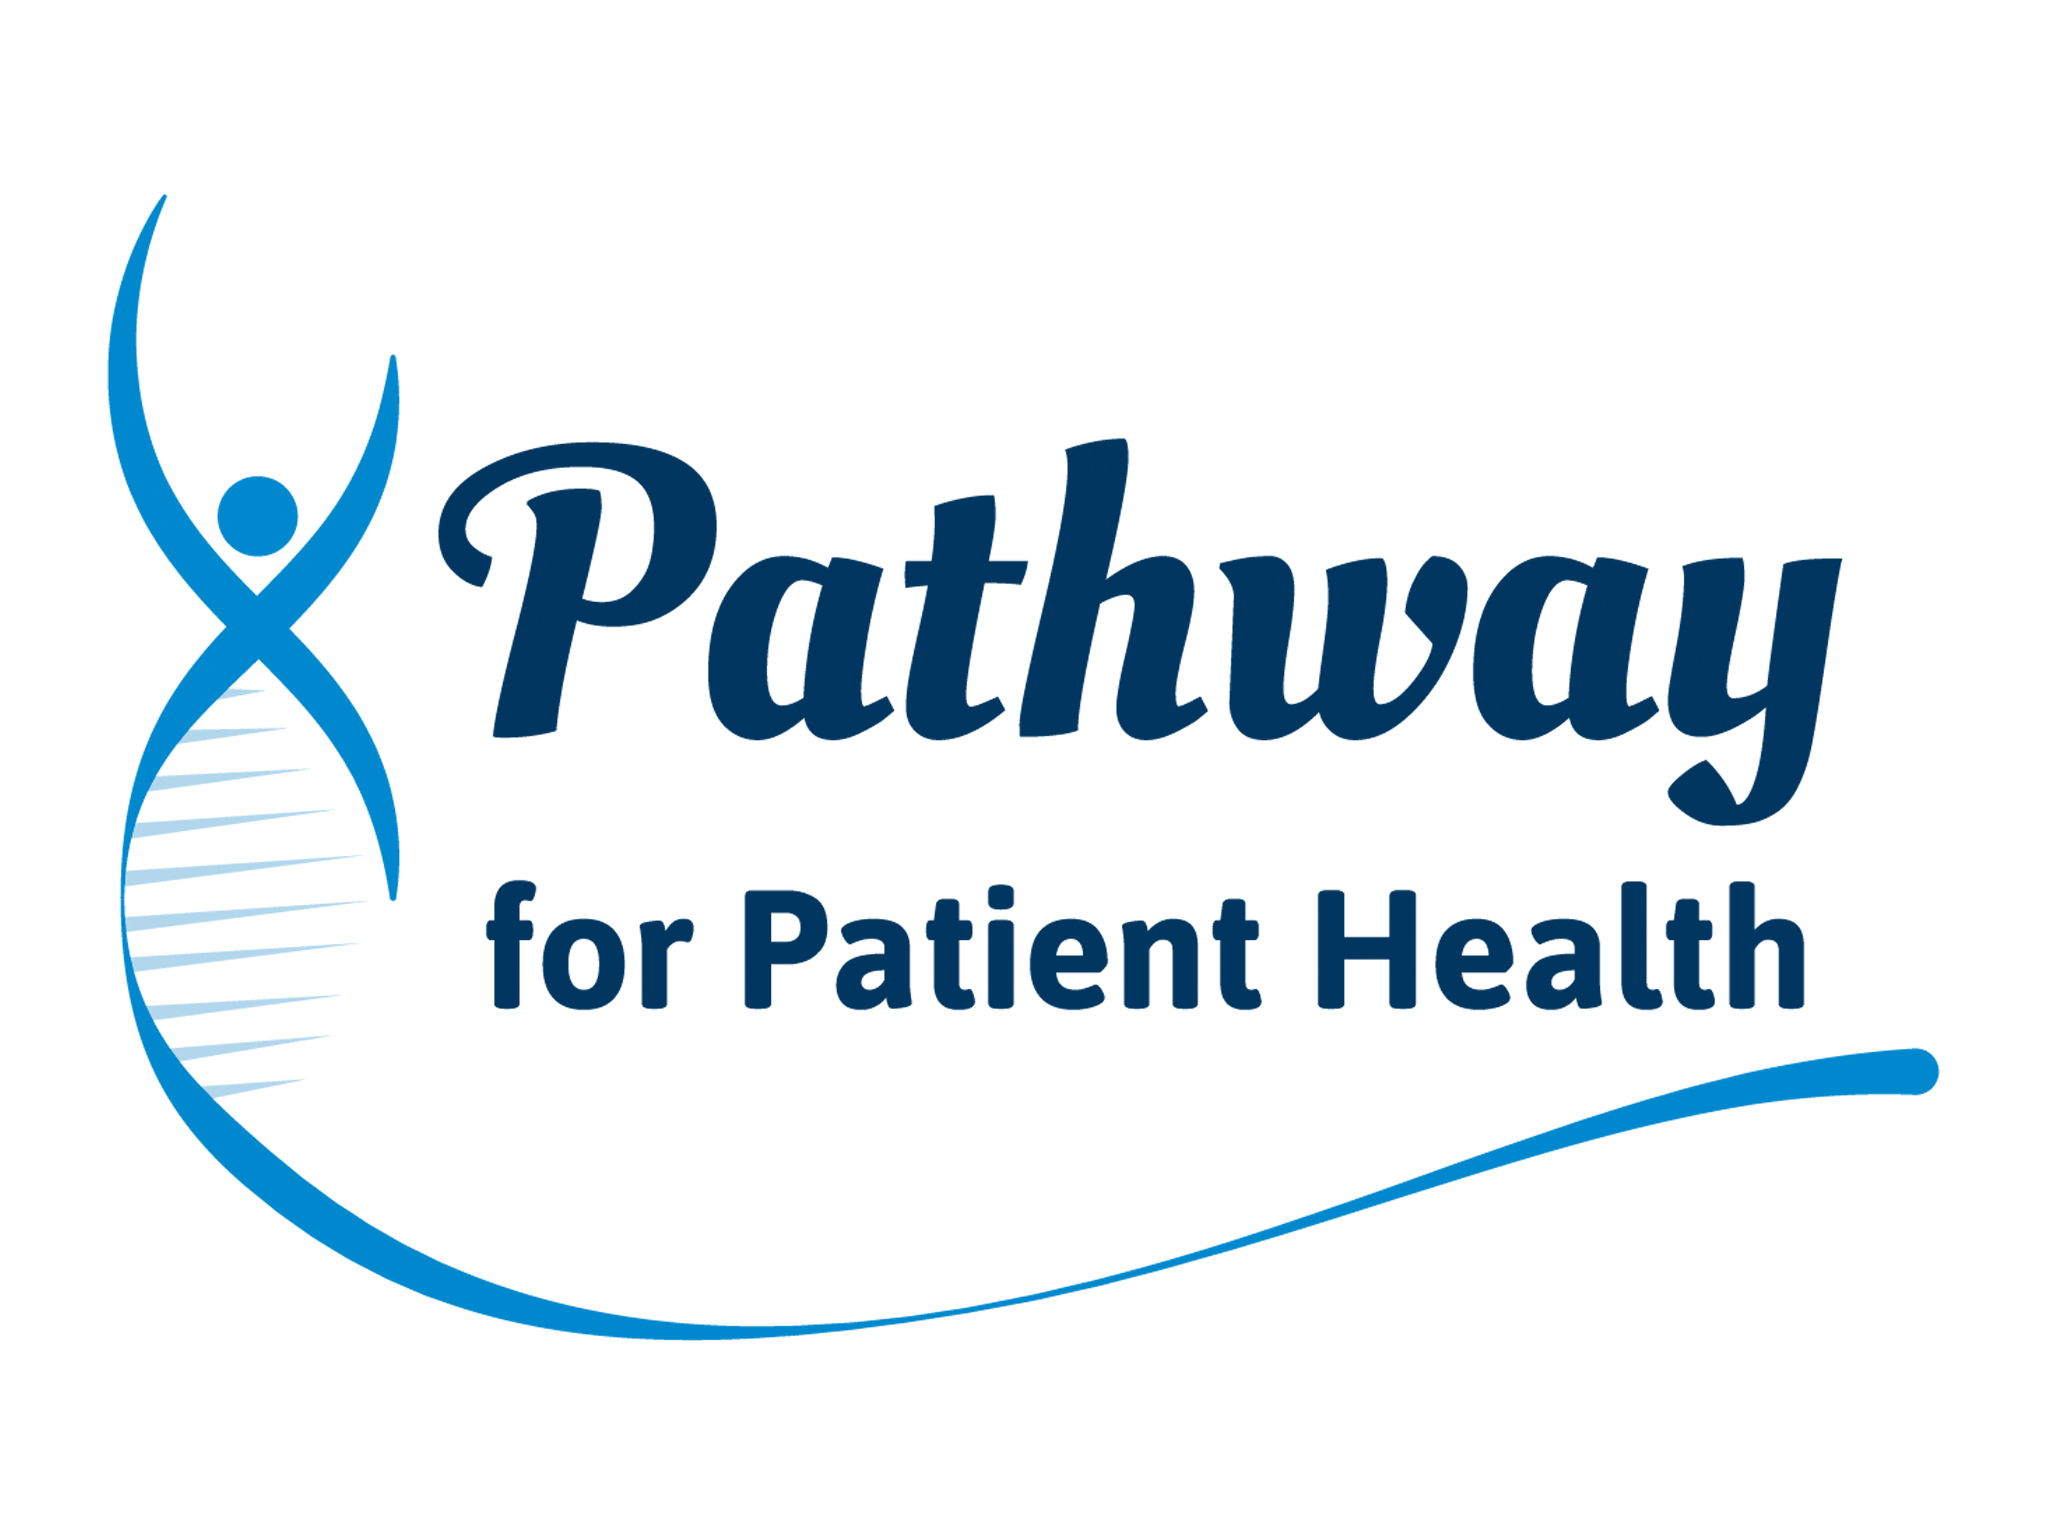 Pathway for Patient Health